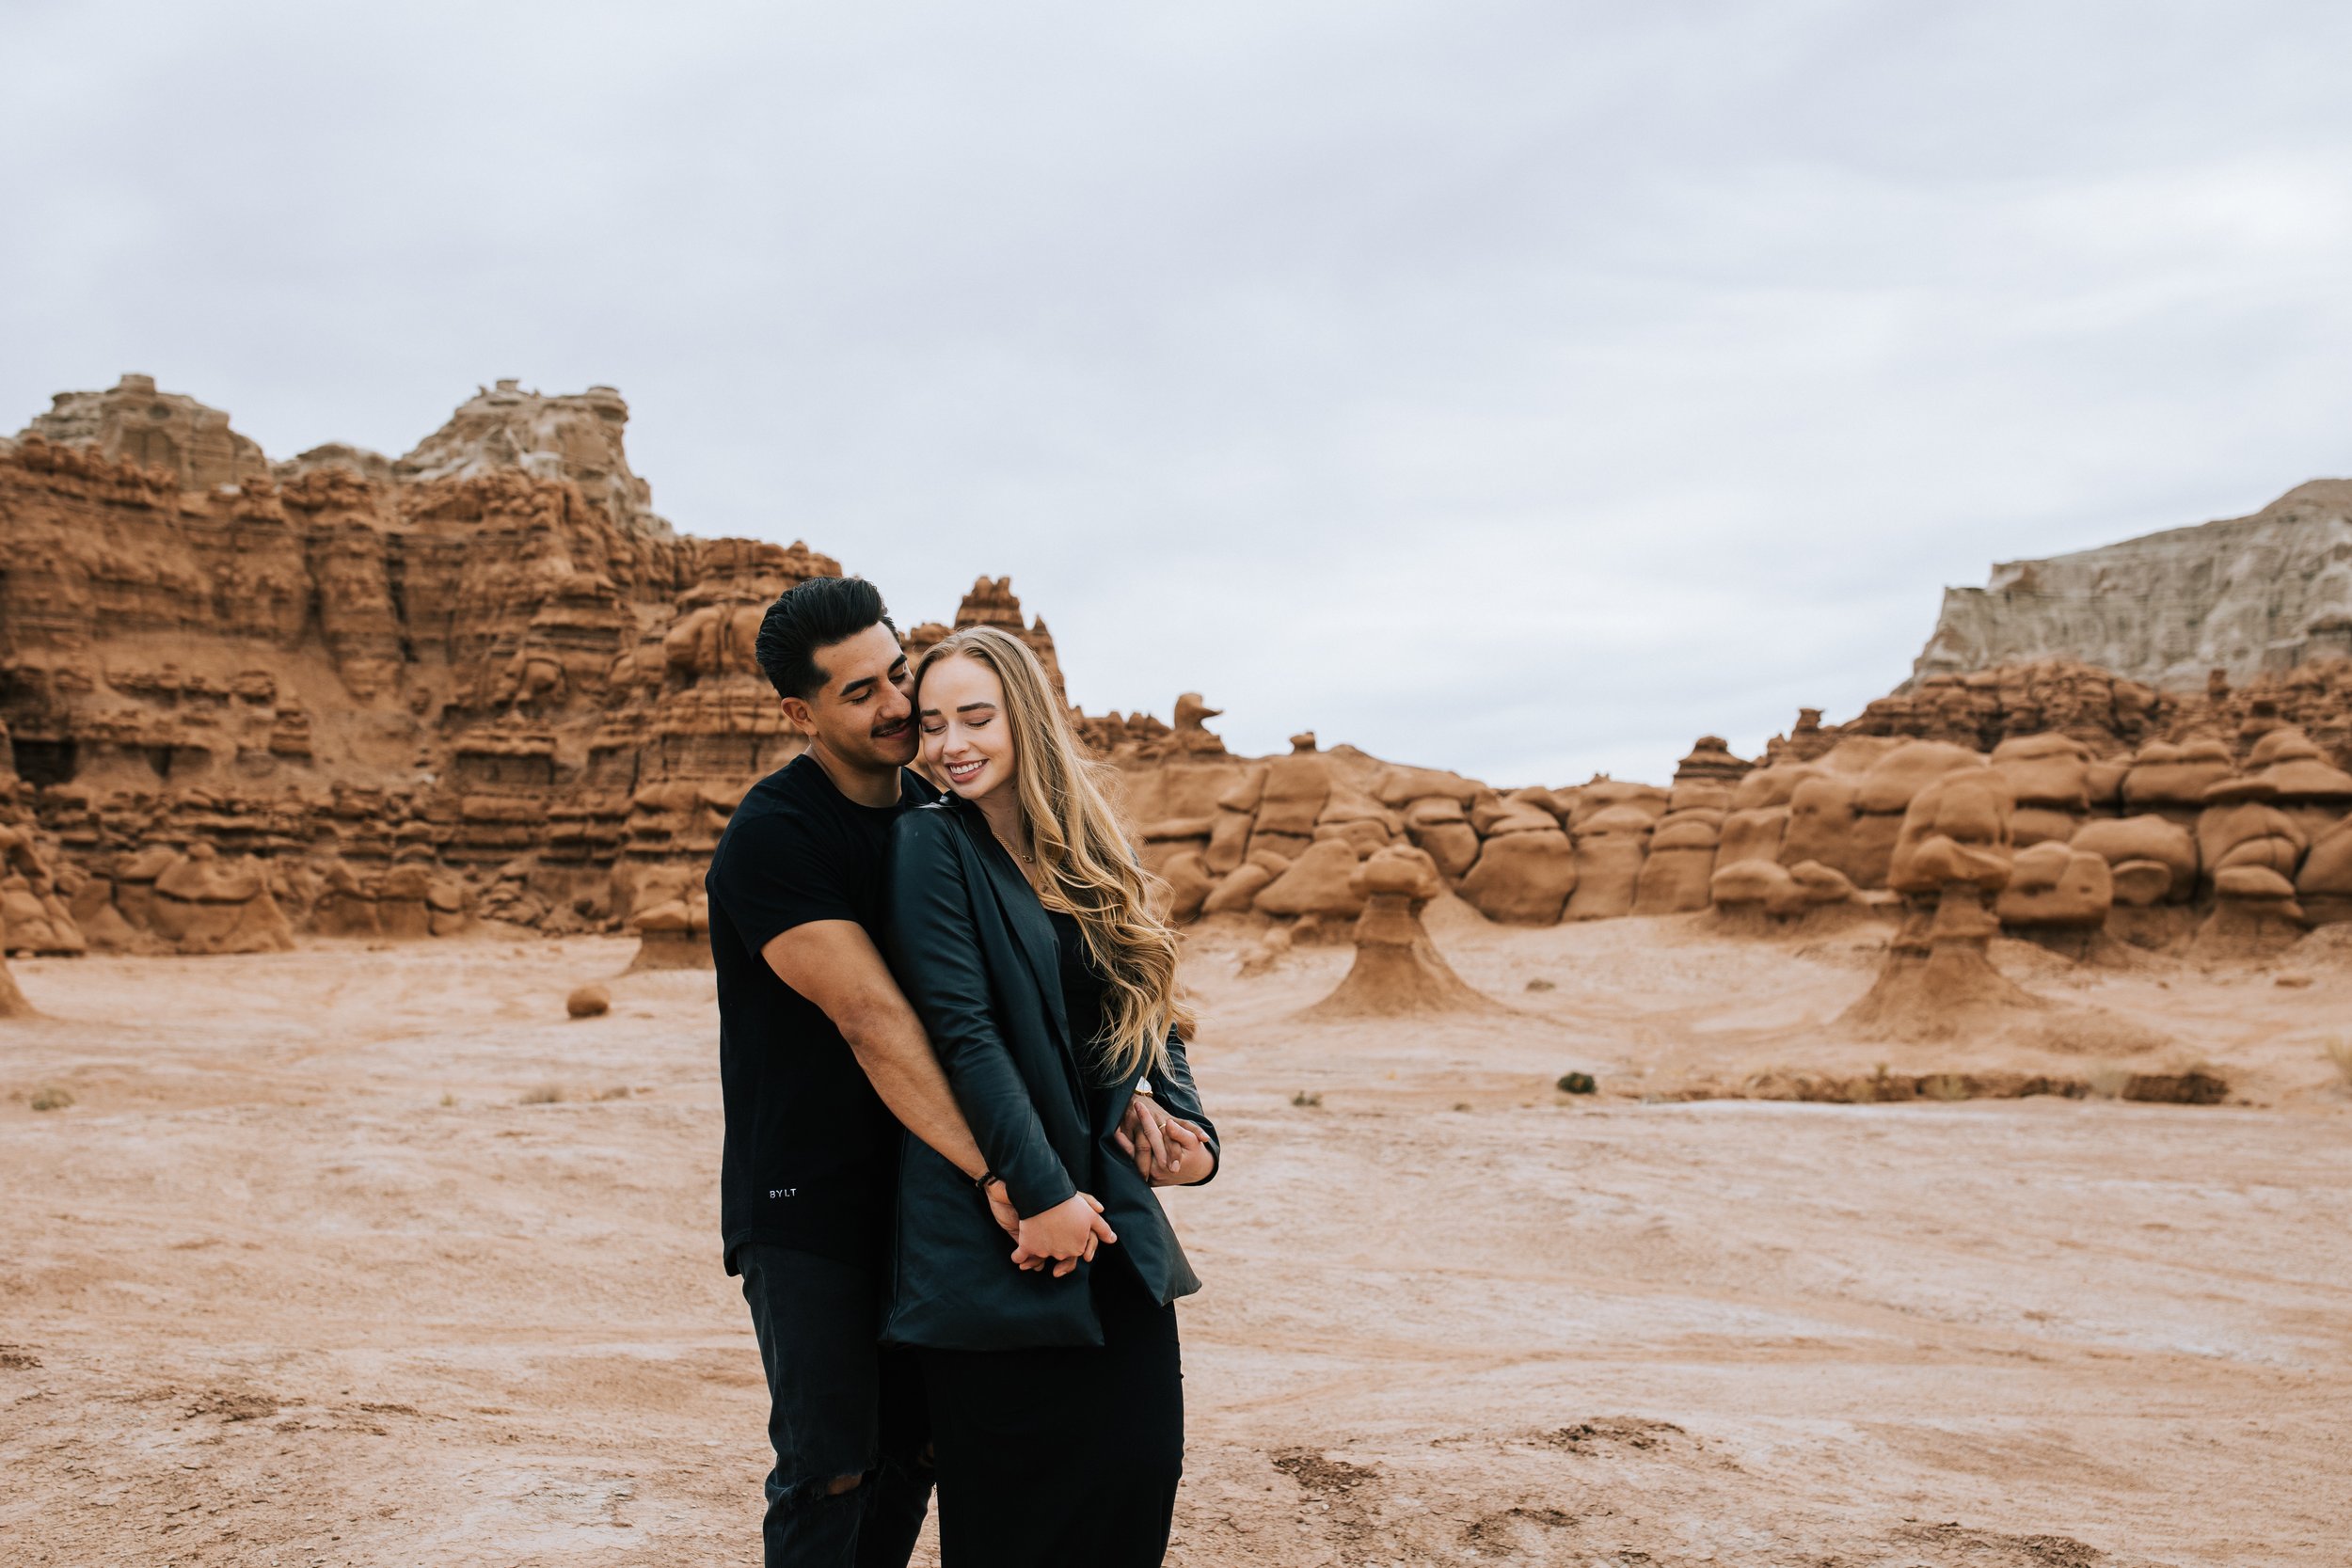  Soon-to-be married couple snuggles together in a picturesque location in Hanksville, Utah by Emily Jenkins Photography. Southern Utah hiking couple outdoorsy engagements #EmilyJenkinsPhotography #EmilyJenkinsEngagements #HanksvillePhotography #Gobli